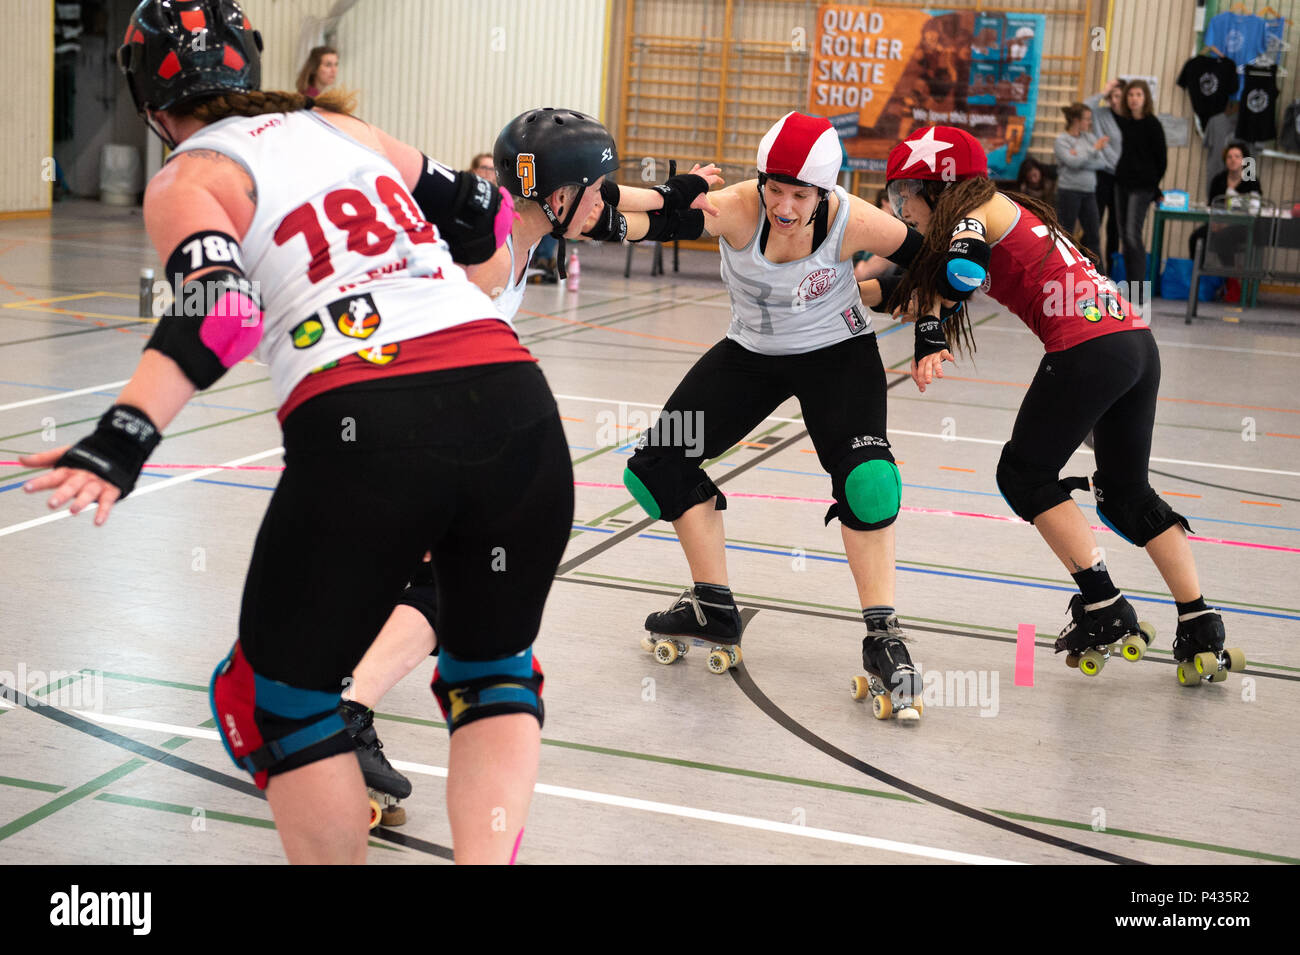 Germany, Potsdam. 14th Apr, 2018. Susanne Eckler (2nd from the right), who  is either called Christie Huckevoll or Hooks in the game, blocks a jammer  when warming up a game against the